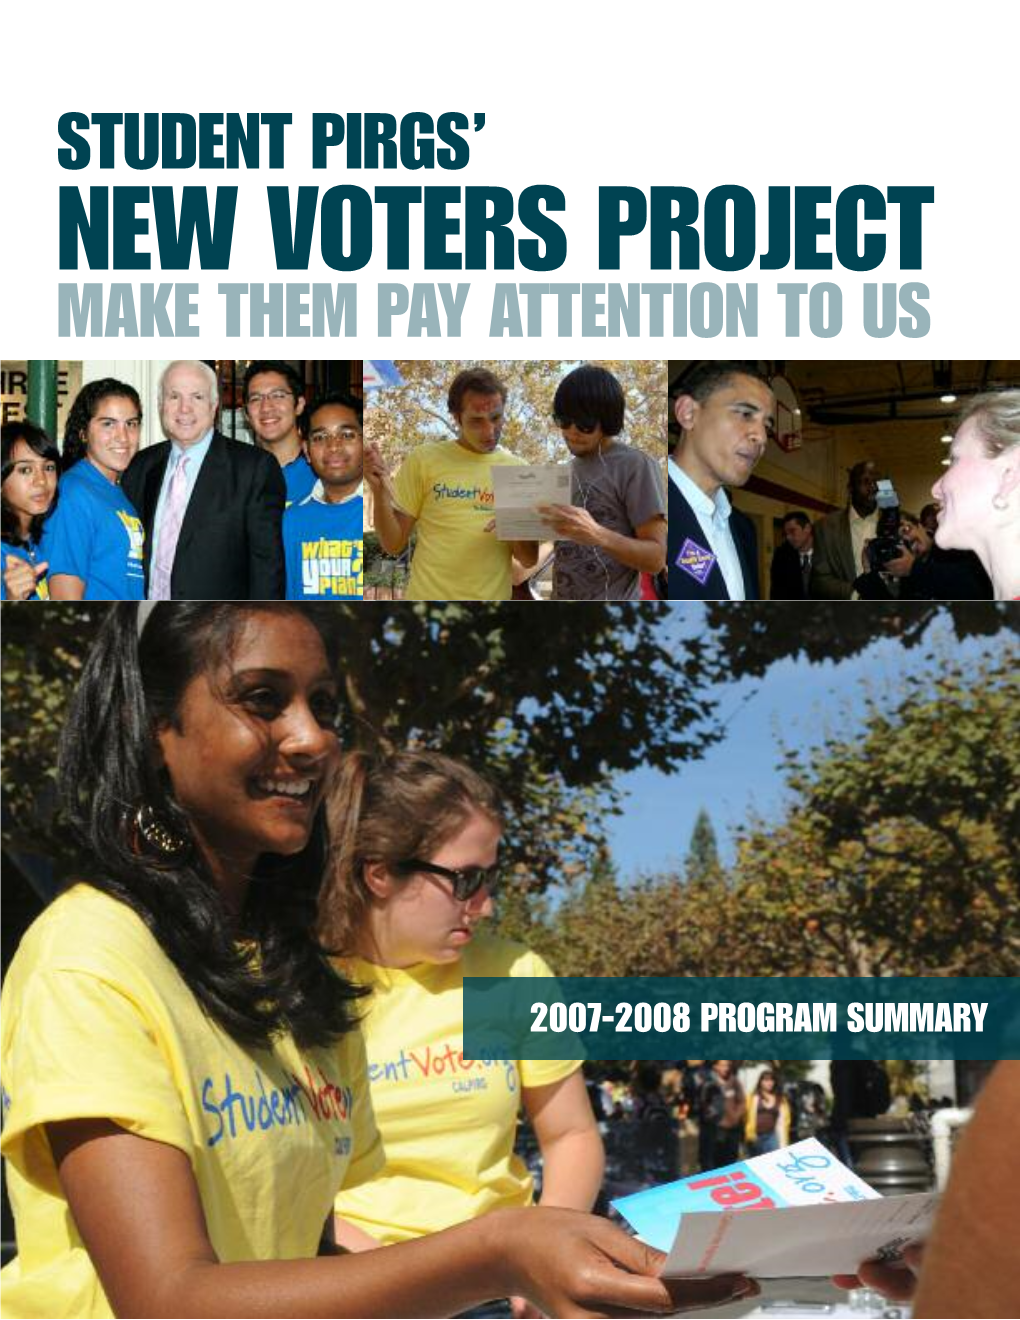 Student Pirgs' New Voters Project Advisory Committee